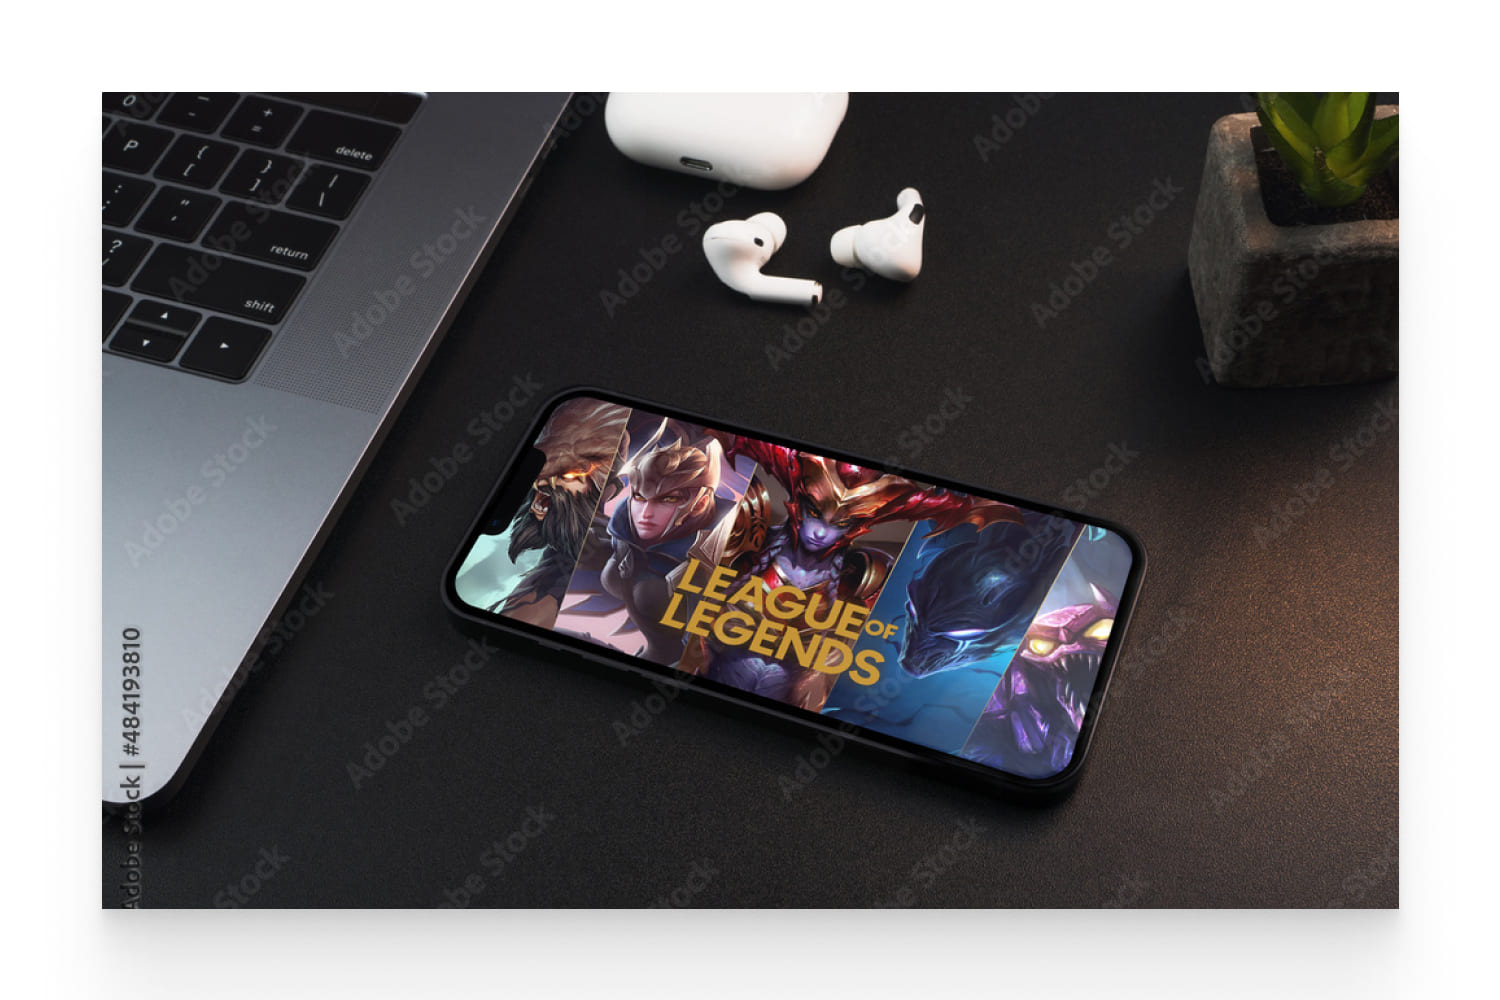 League of Legends game app on the smartphone screen on black background table.